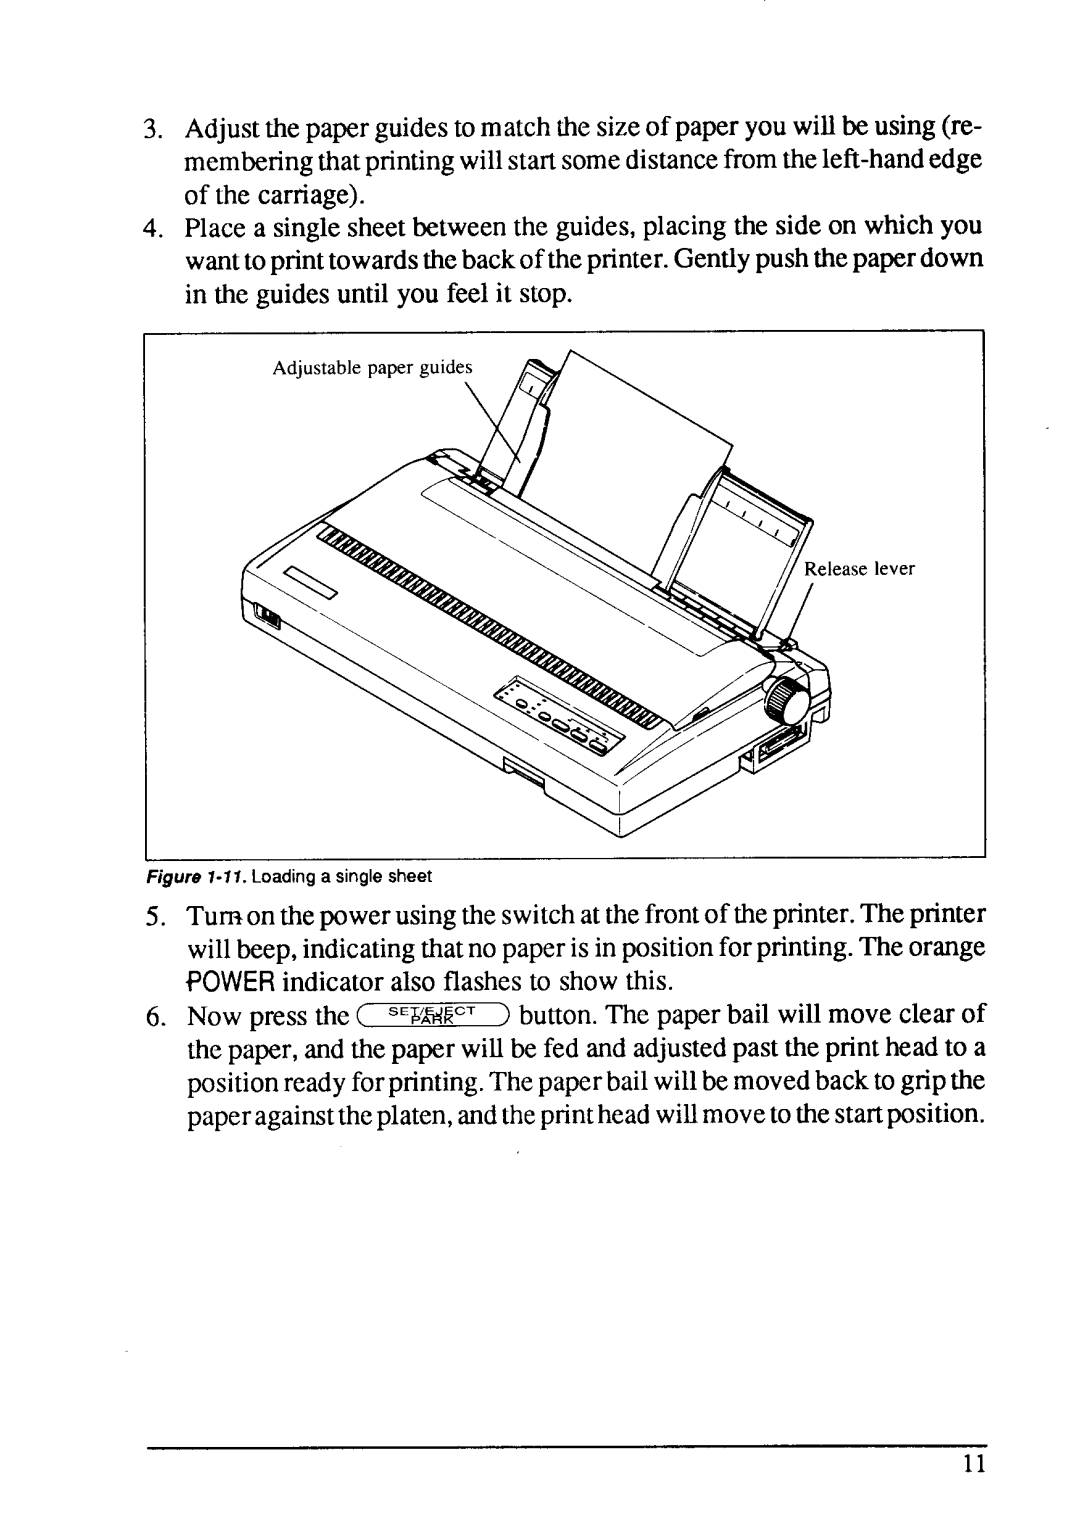 Star Micronics LC24-15 user manual Adjustable paper guides lever I, 77. Loading a single sheet 